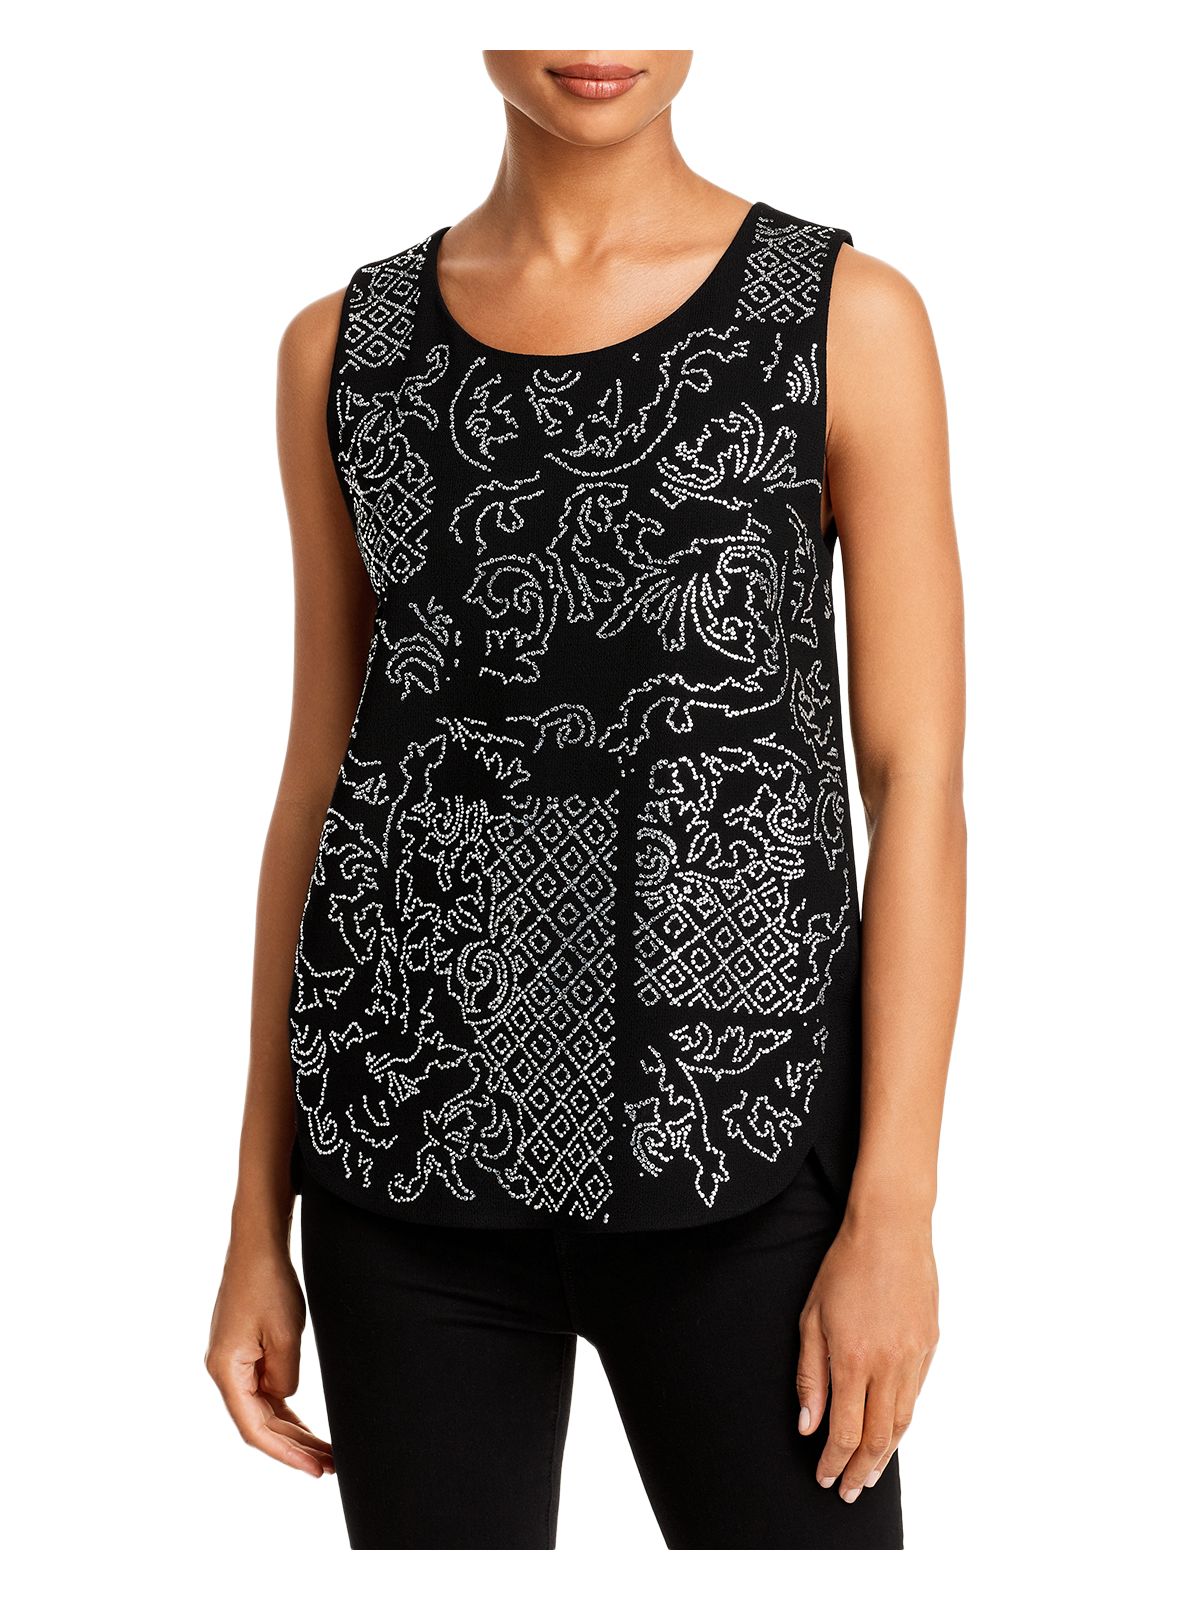 LIBERTINE Womens Black Embellished Vented Hem Pullover Lined Sleeveless Scoop Neck Tank Top S